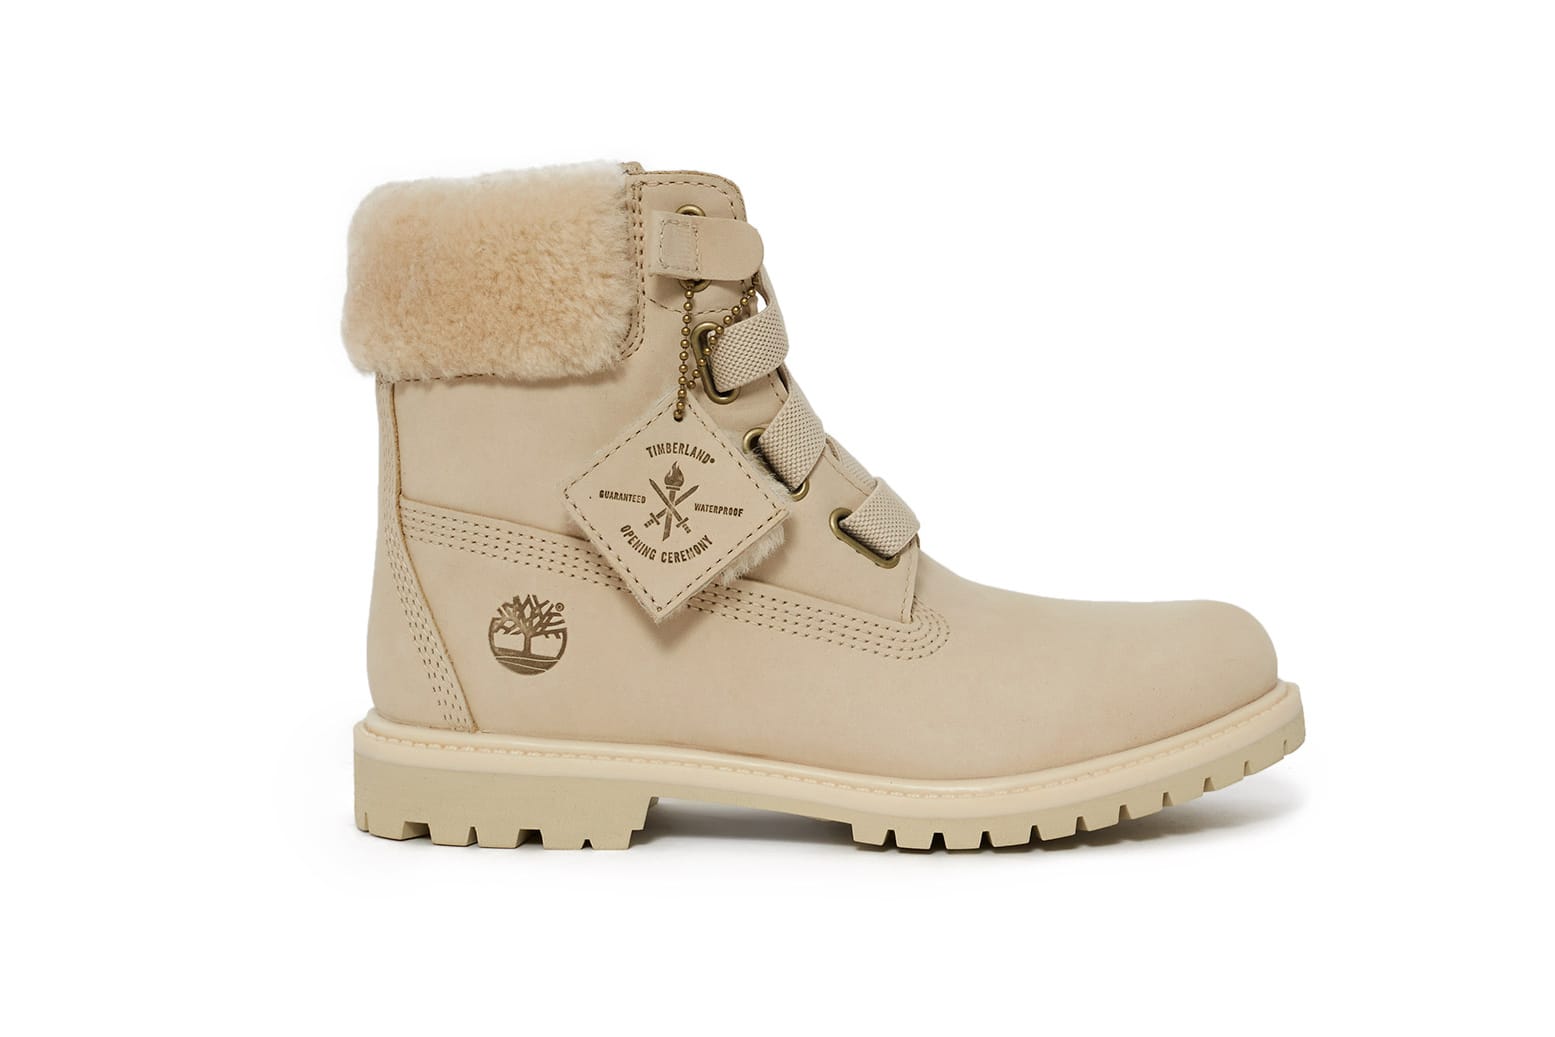 knock off timberlands forever 21